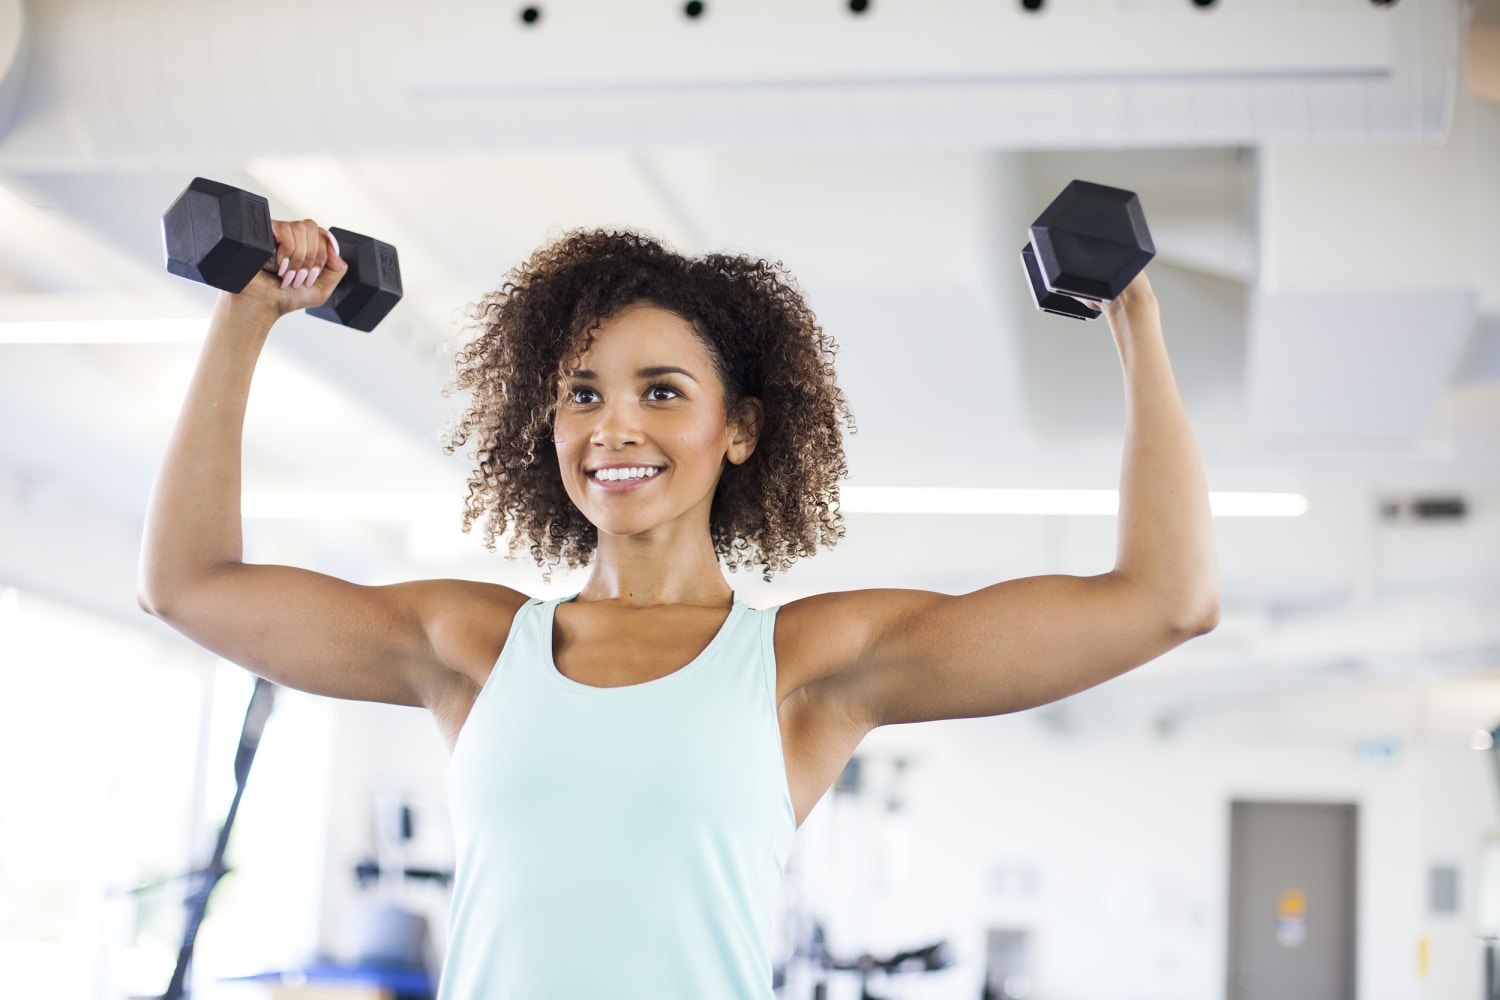 4 Arm Exercises to Sculpt STRONG Shoulders, Chest and Back Muscles